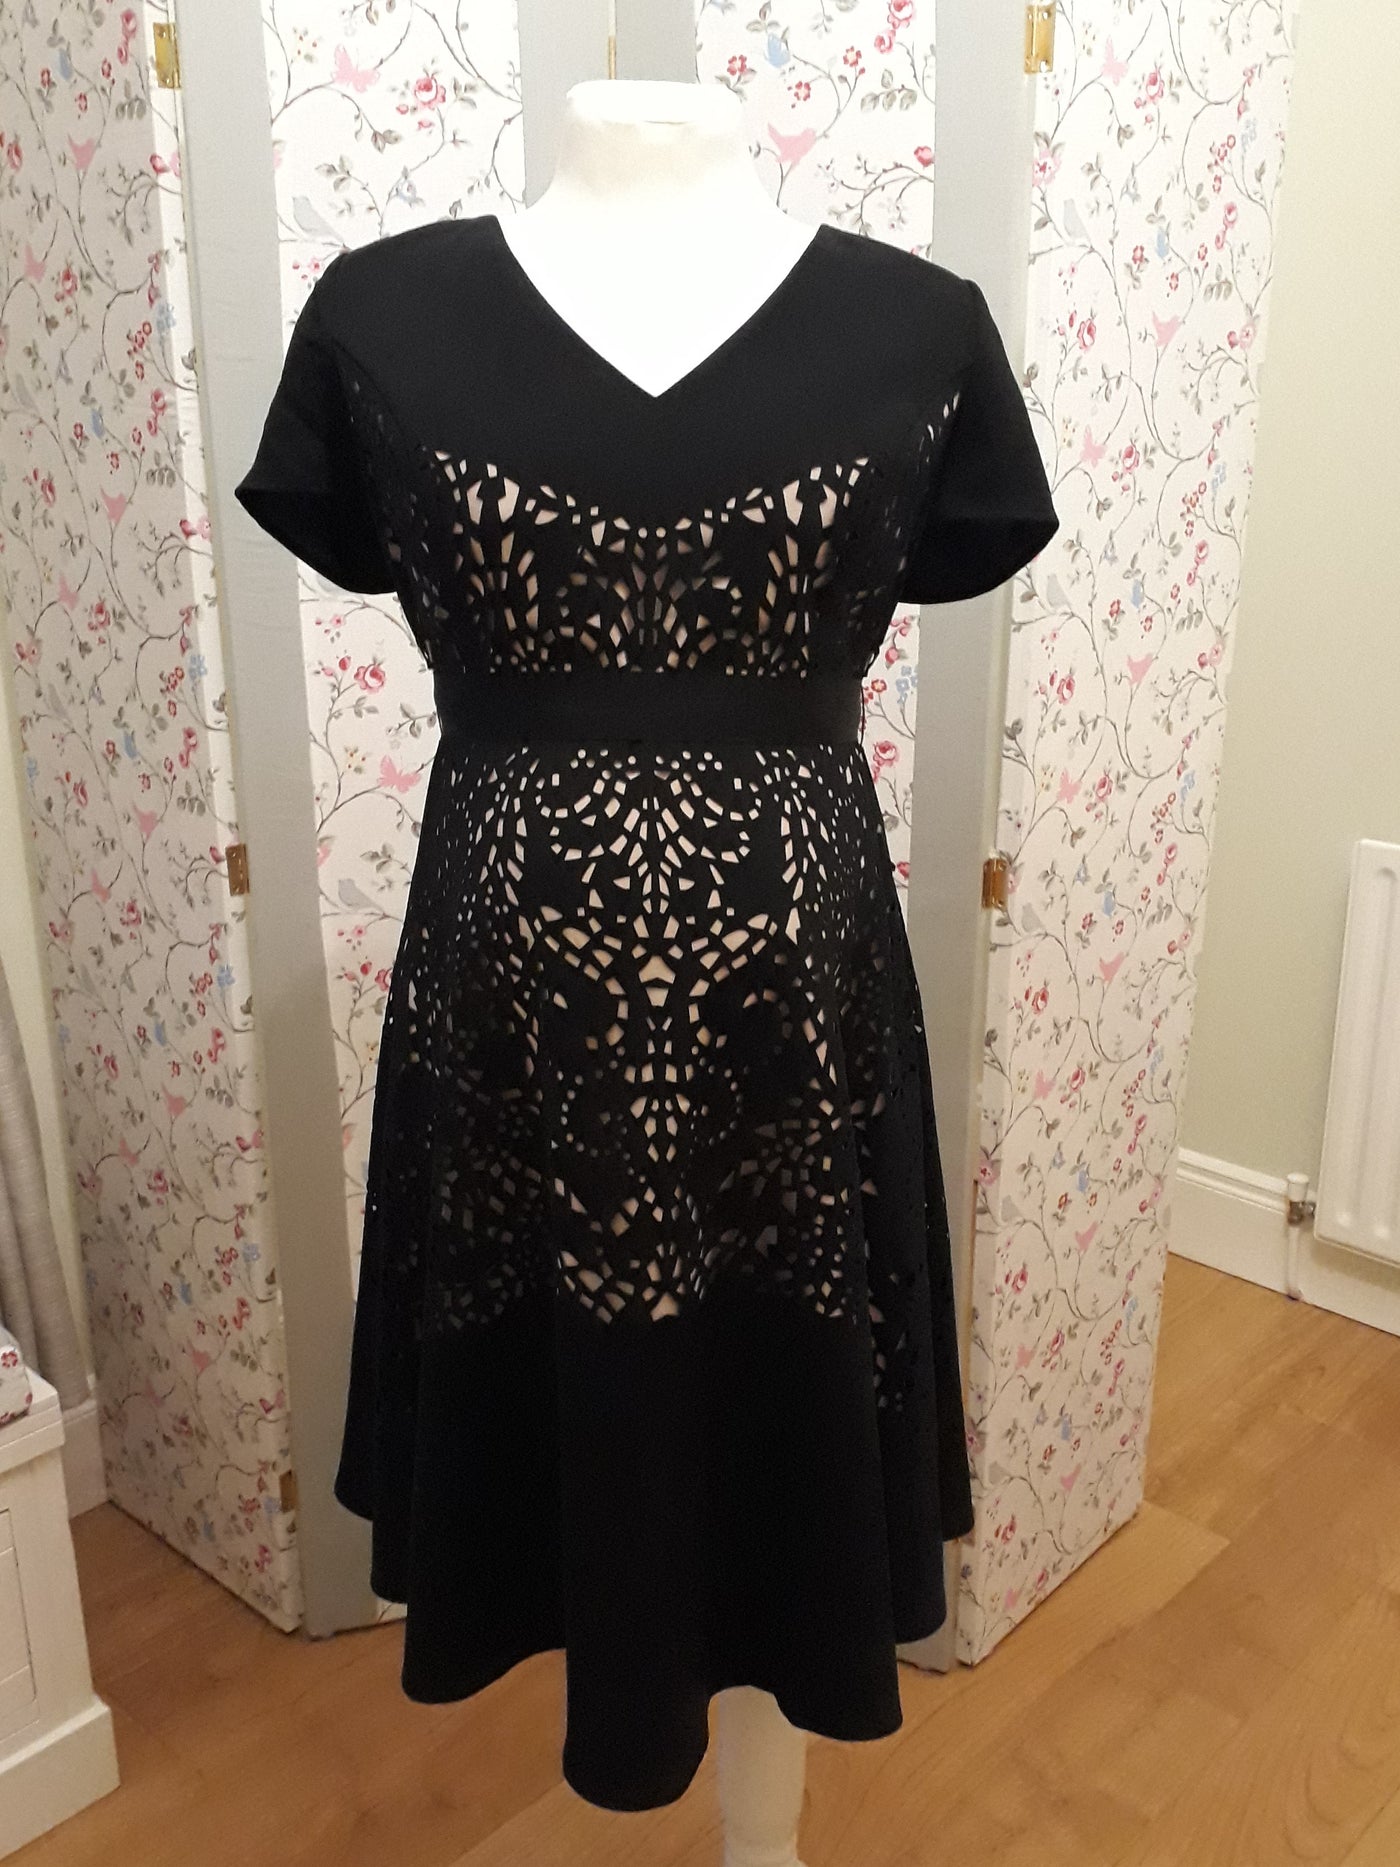 A Pea In The Pod Black Dress with Cut Out Detail - Size 12/14